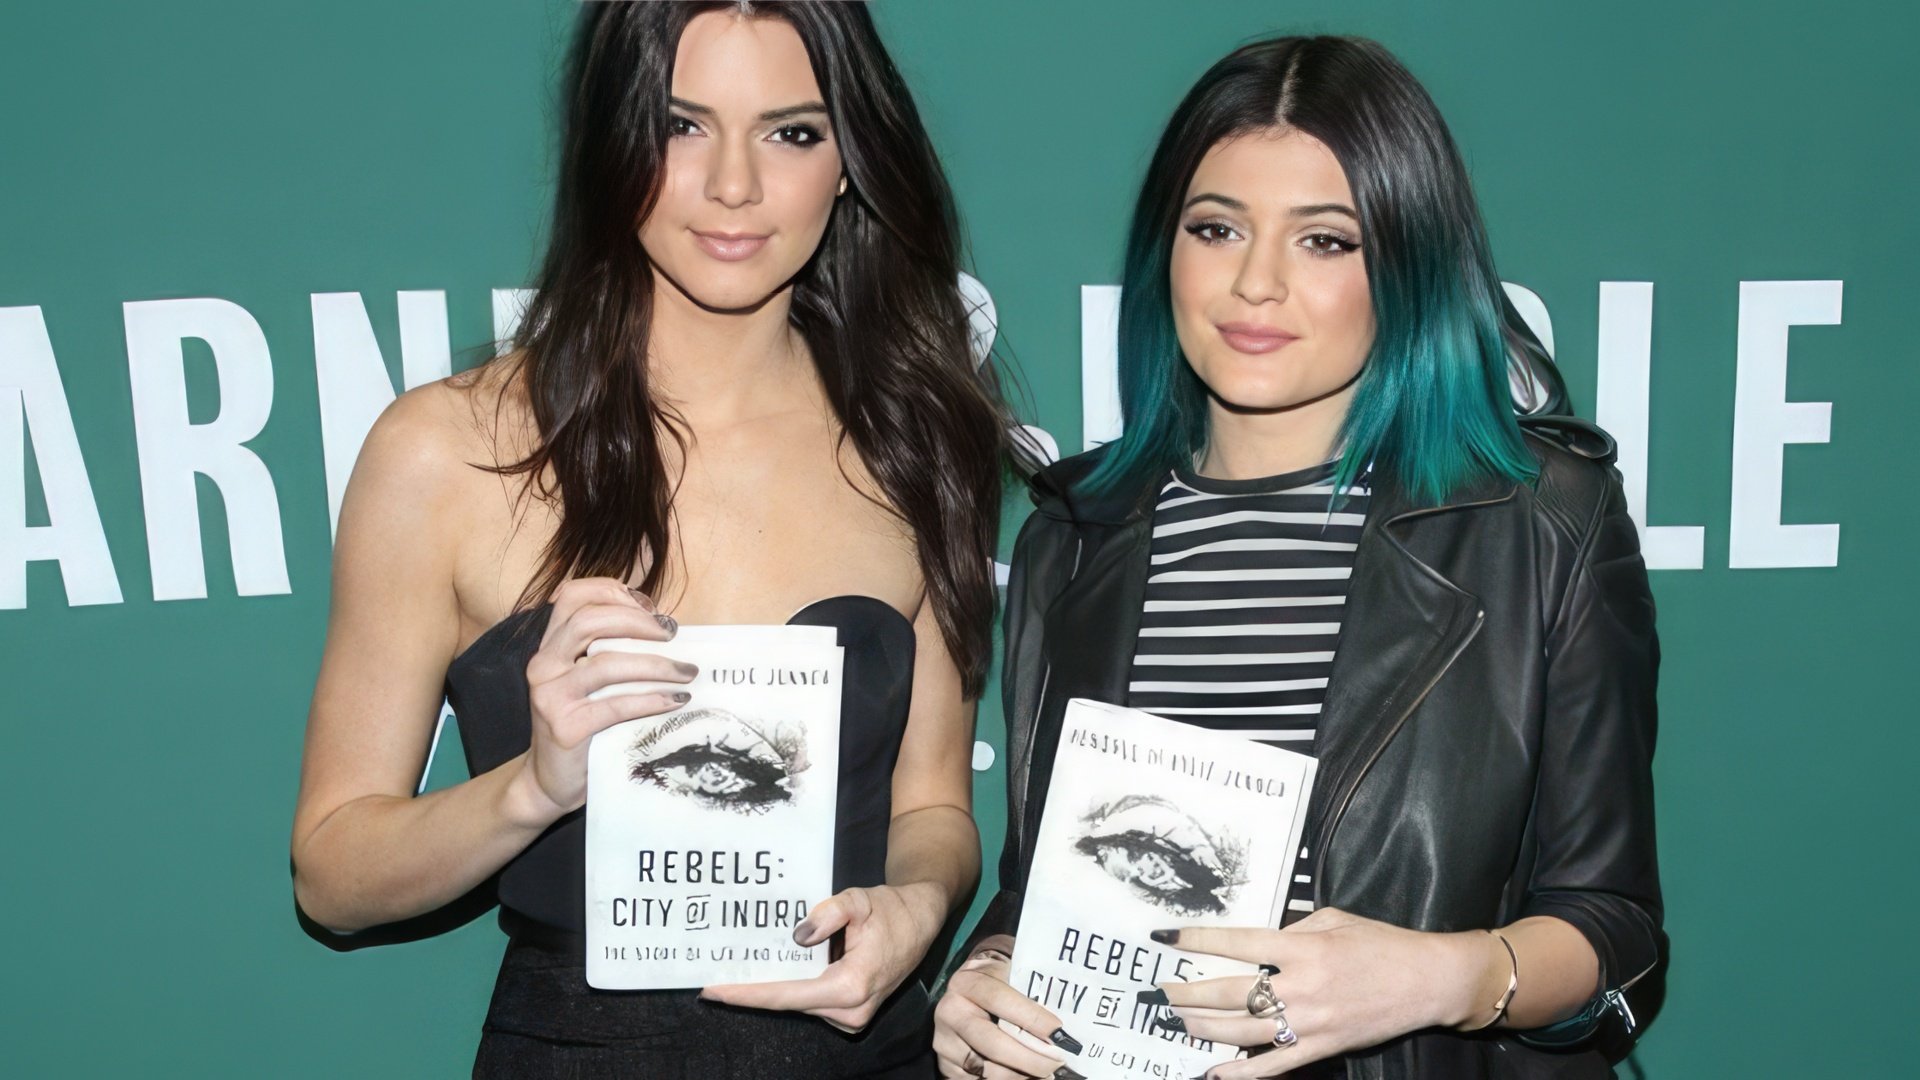 Jenner sisters presented the book 'Rebels: City of Indra'